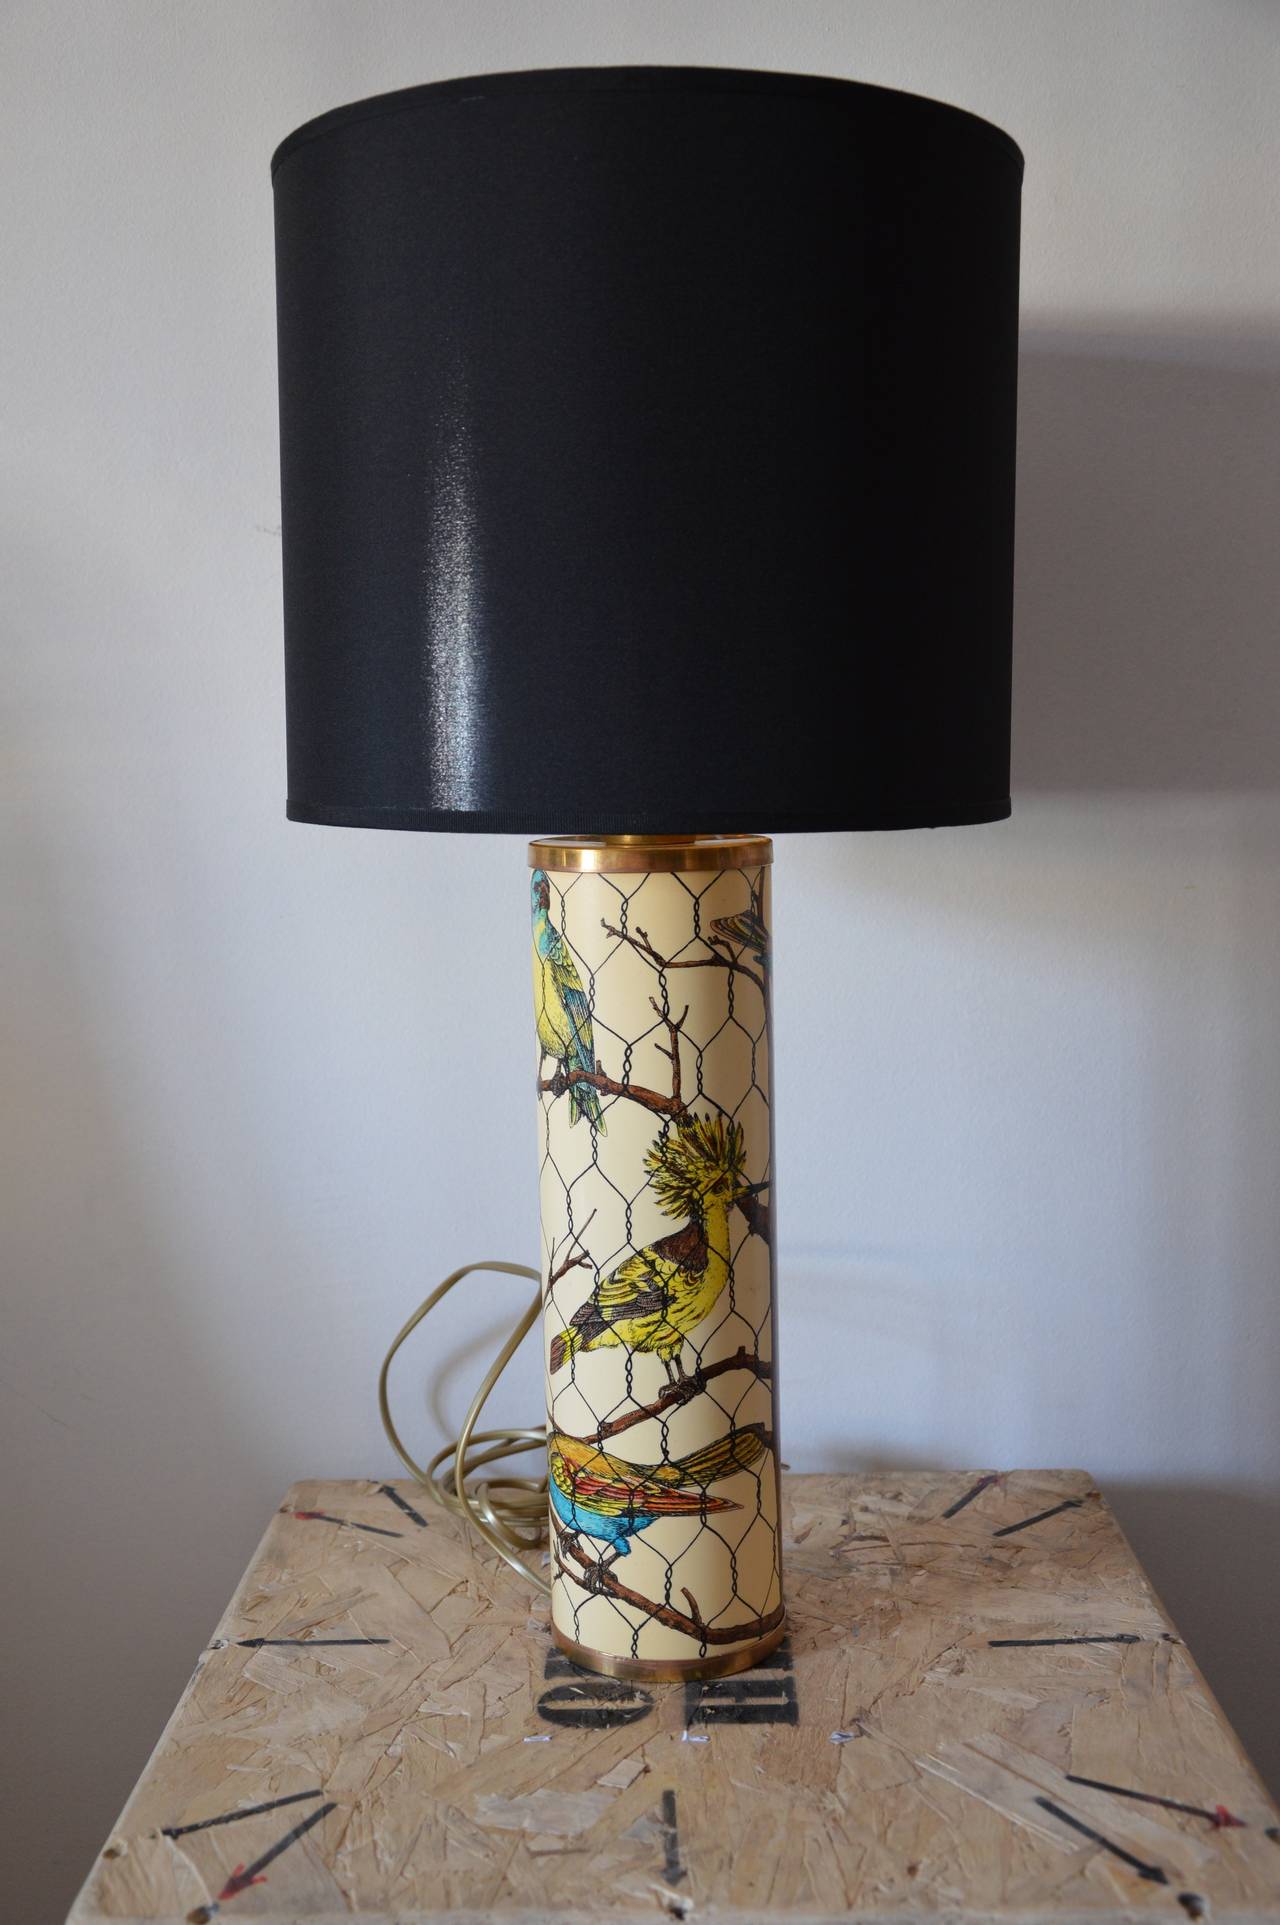 White cream table lamp by Piero Fornasetti with decor of birds. 
Base in brass with black clothe lampshade golden inside. Signed Fornasetti Milano on the bottom. 
Dimensions : 
H : 43cm 
Diameter : 10cm
H lamp + lampshade : 64cm
Diameter of